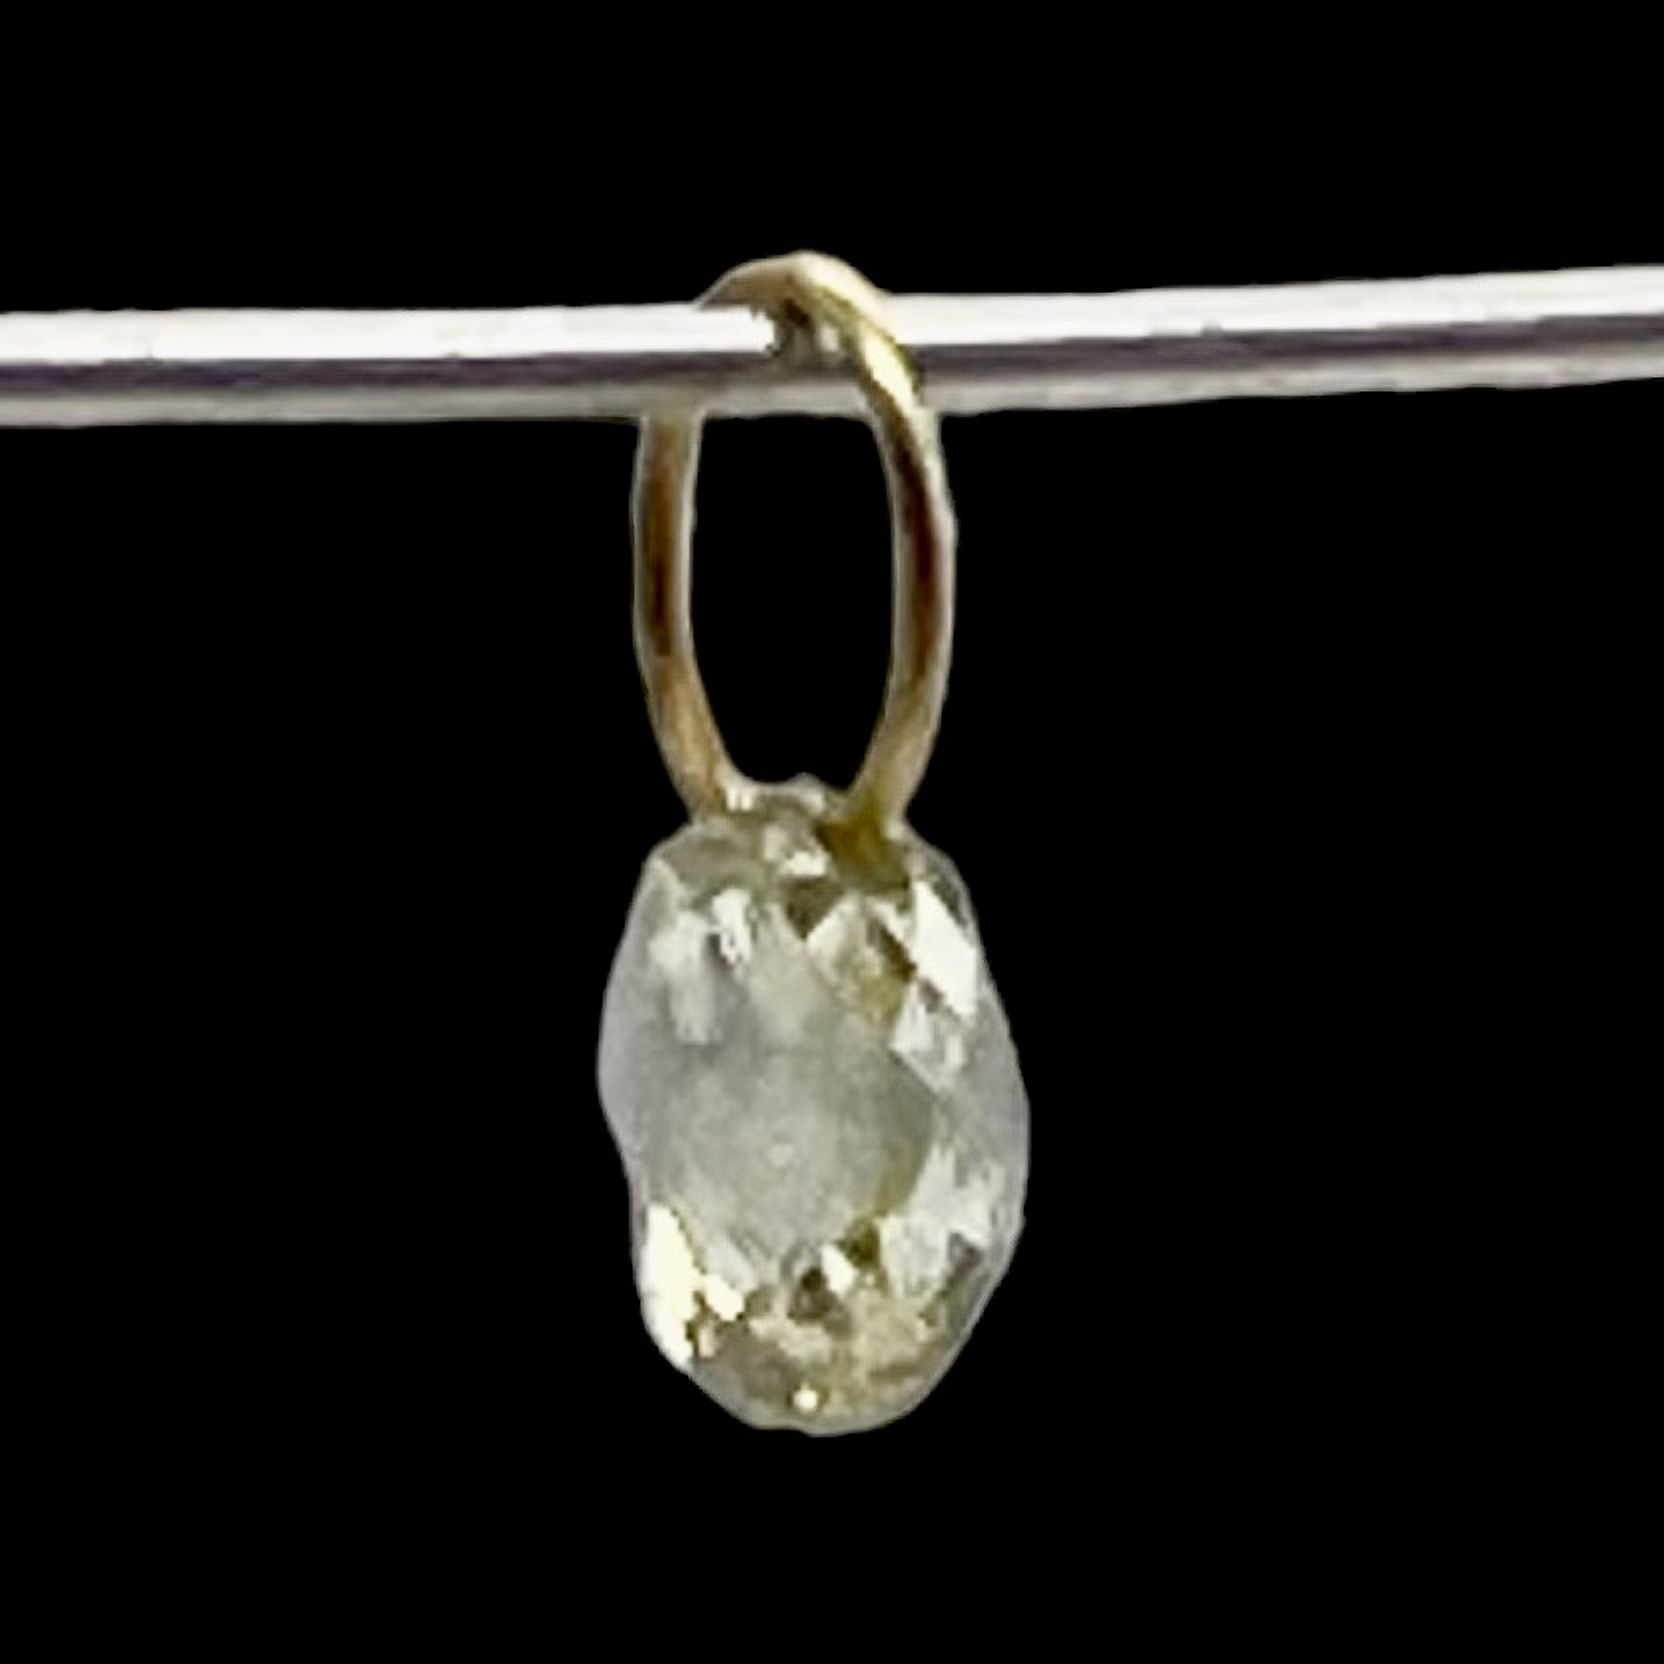 0.26cts Natural Canary Diamond & 18K Gold Pendant | 3.5x2.5x2mm | 1 Bead | - image 3 of 12